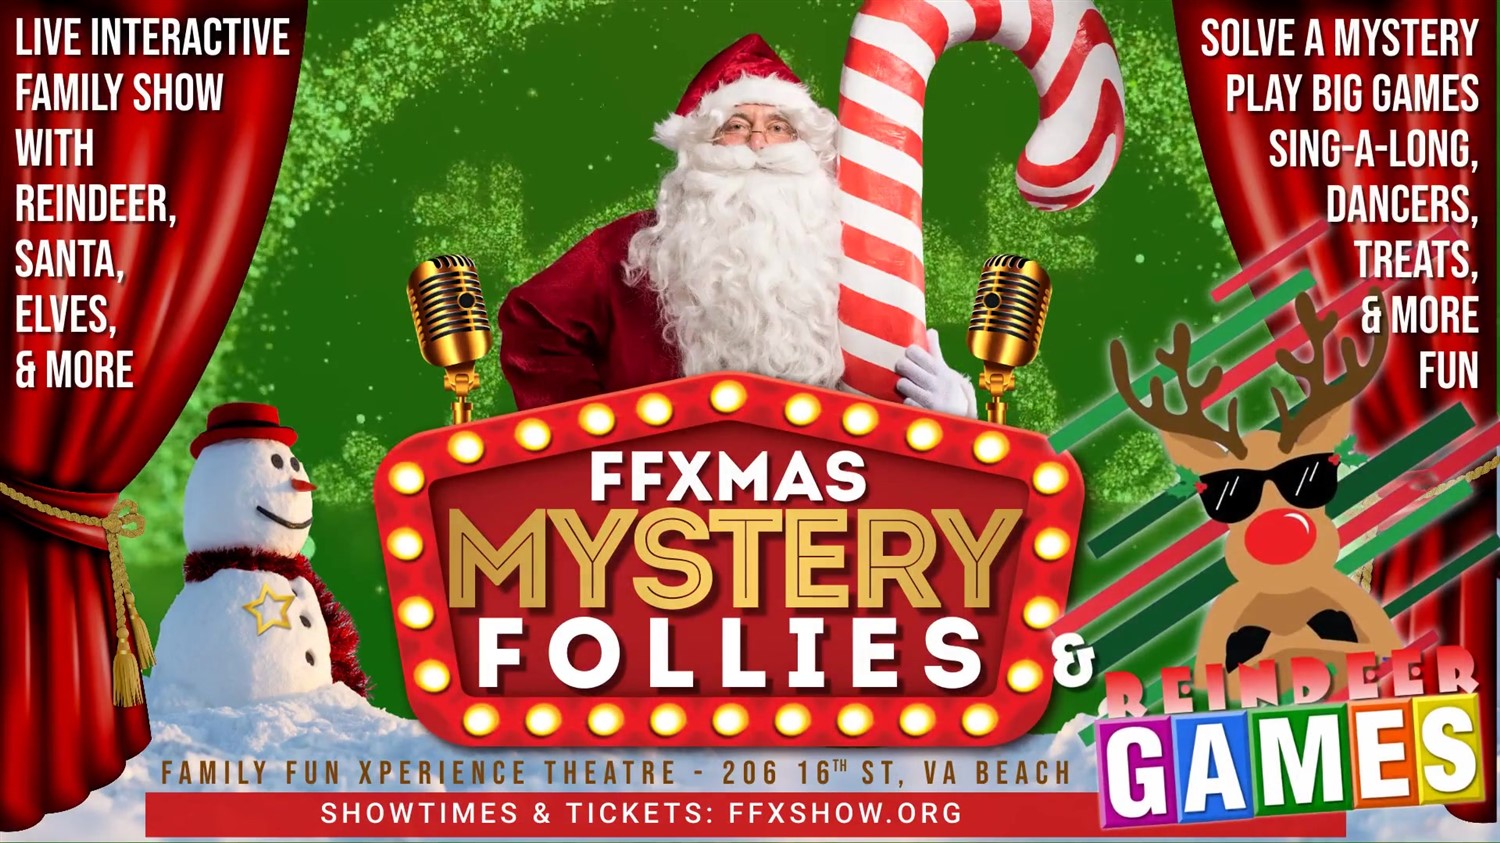 FFXmas MYSTERY FOLLIES Plus Bonus Reindeer Games on Dec 09, 19:00@FFX Theatre - Pick a seat, Buy tickets and Get information on Family Fun Xperience tickets.ffxshow.org